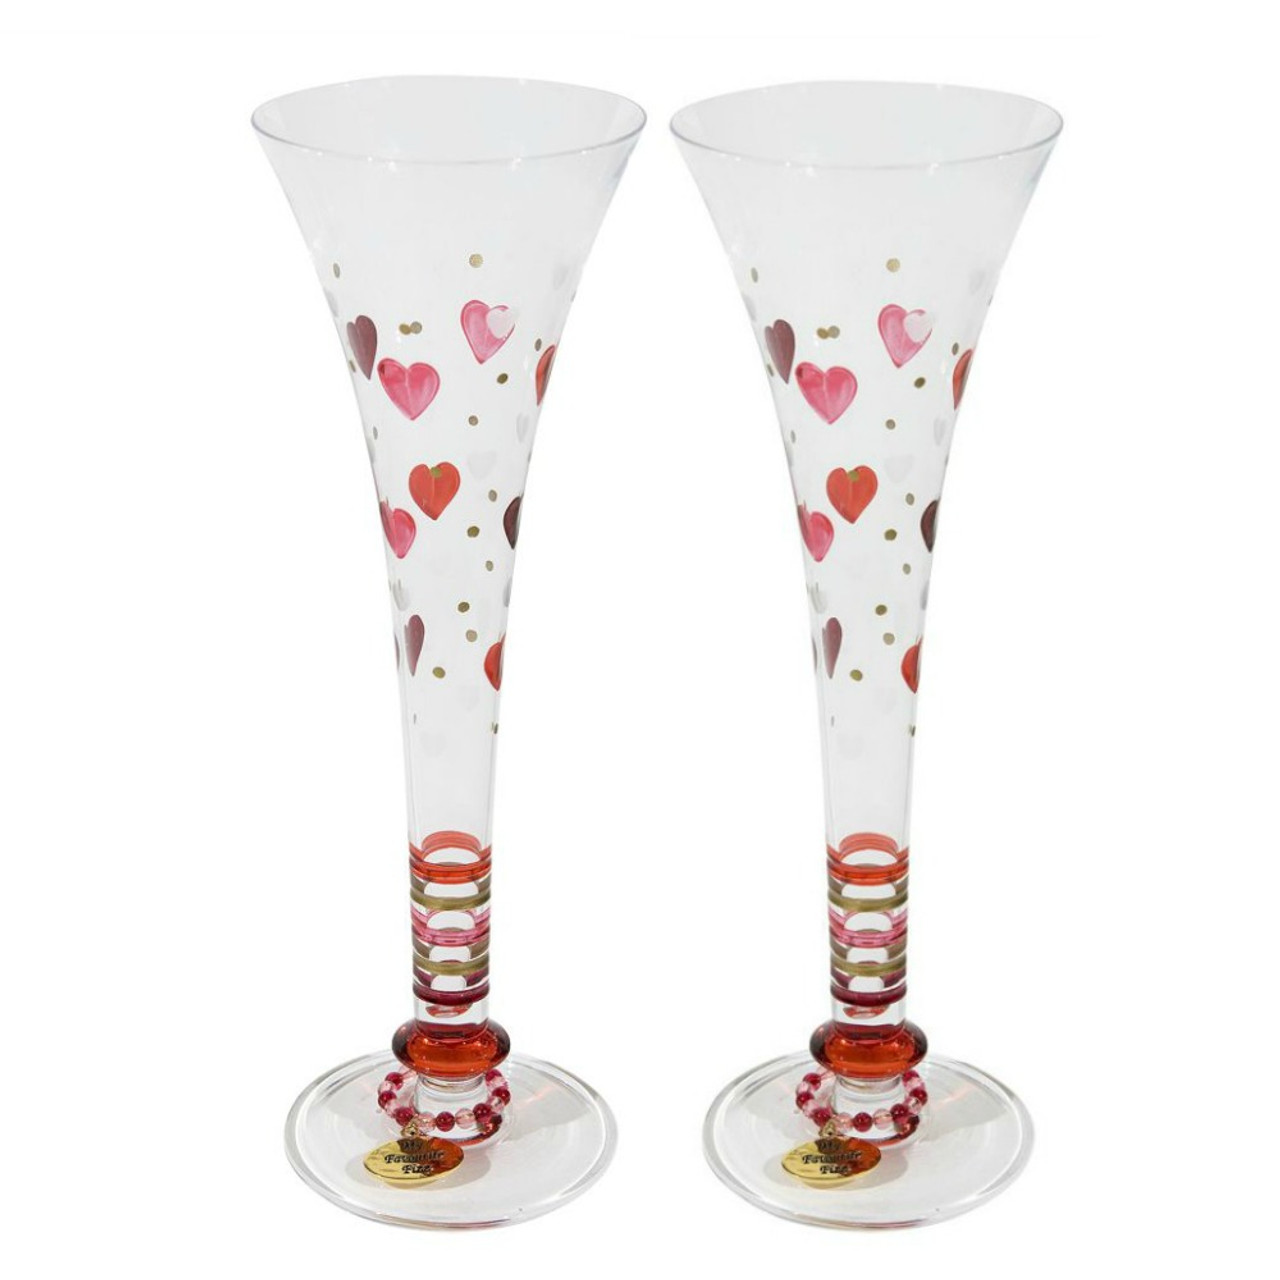 https://cdn11.bigcommerce.com/s-byct7xpd/images/stencil/1280x1280/products/761/3714/CreativeGfts_Handpainted_Toasting_Glasses__50472.1540151740.jpg?c=2